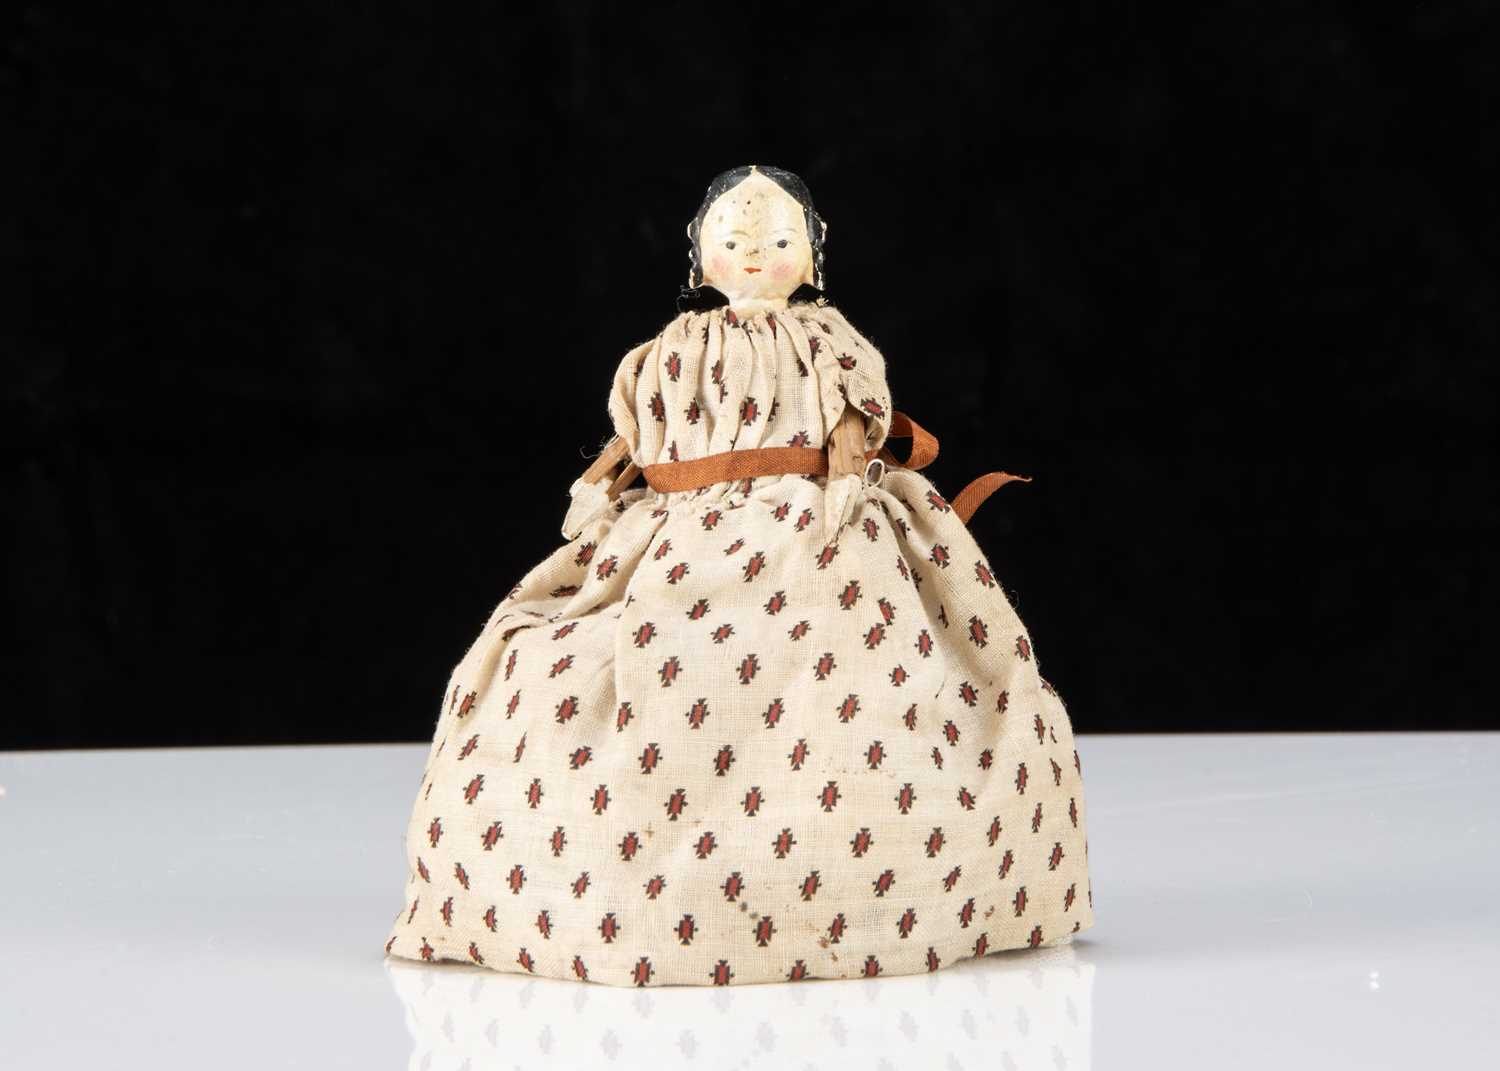 Lot 1 - An 19th century Grodnerthal dolls’ house doll with side ringlets